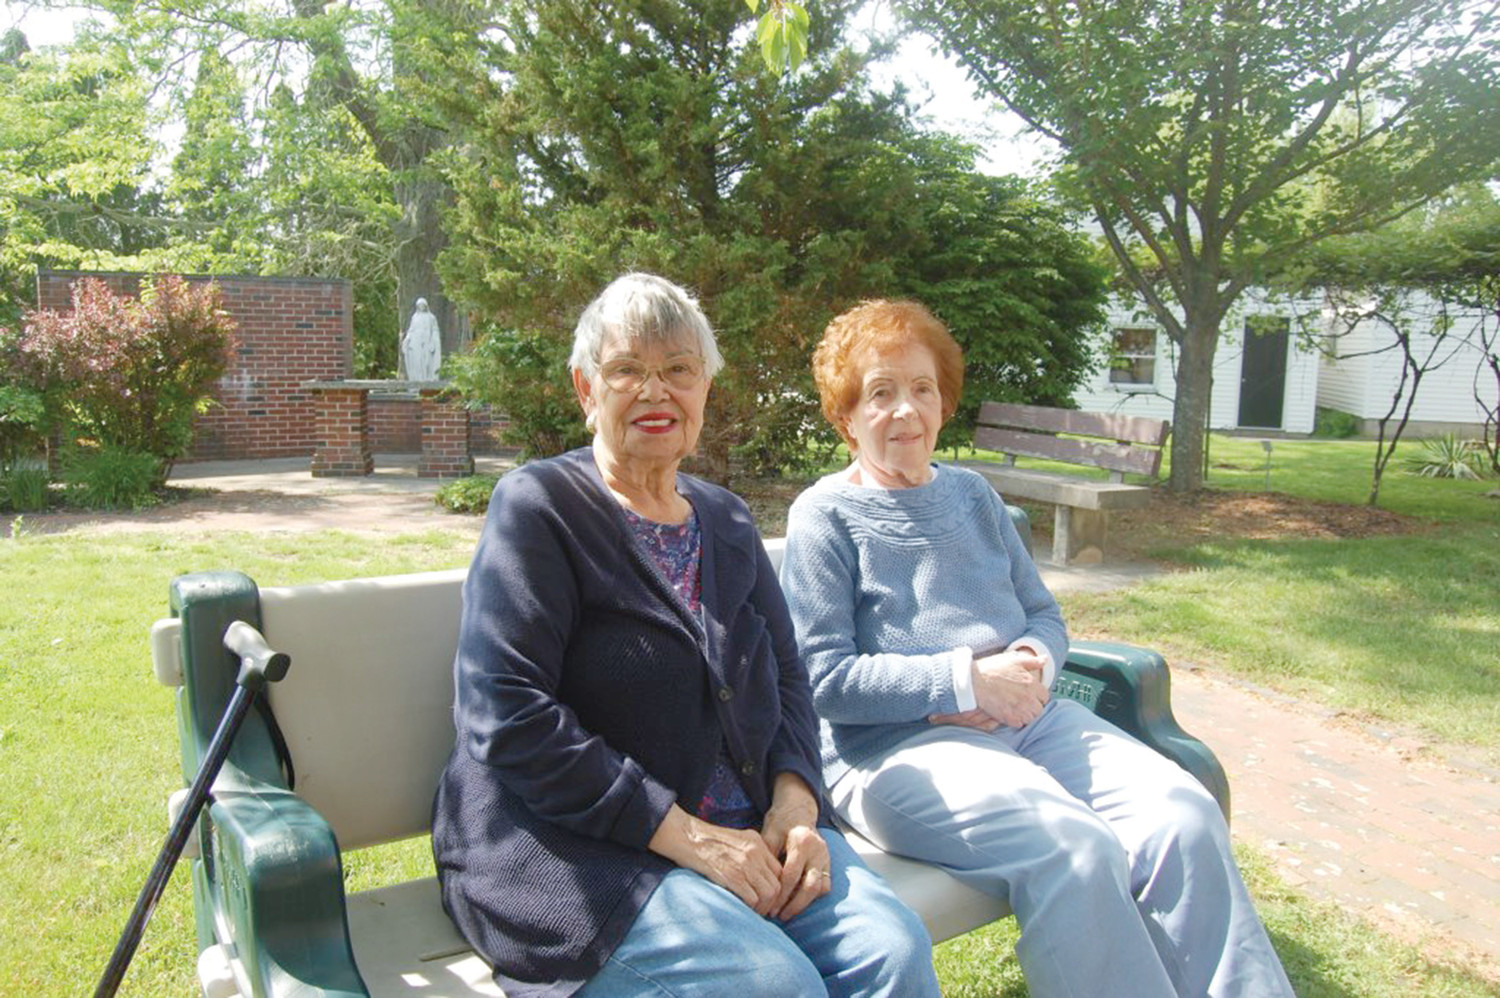 Benvinda Pires, left, and Elisa Fascia, two participants in the program at the Fruit Hill Adult Day Service for the Elderly in North Providence.